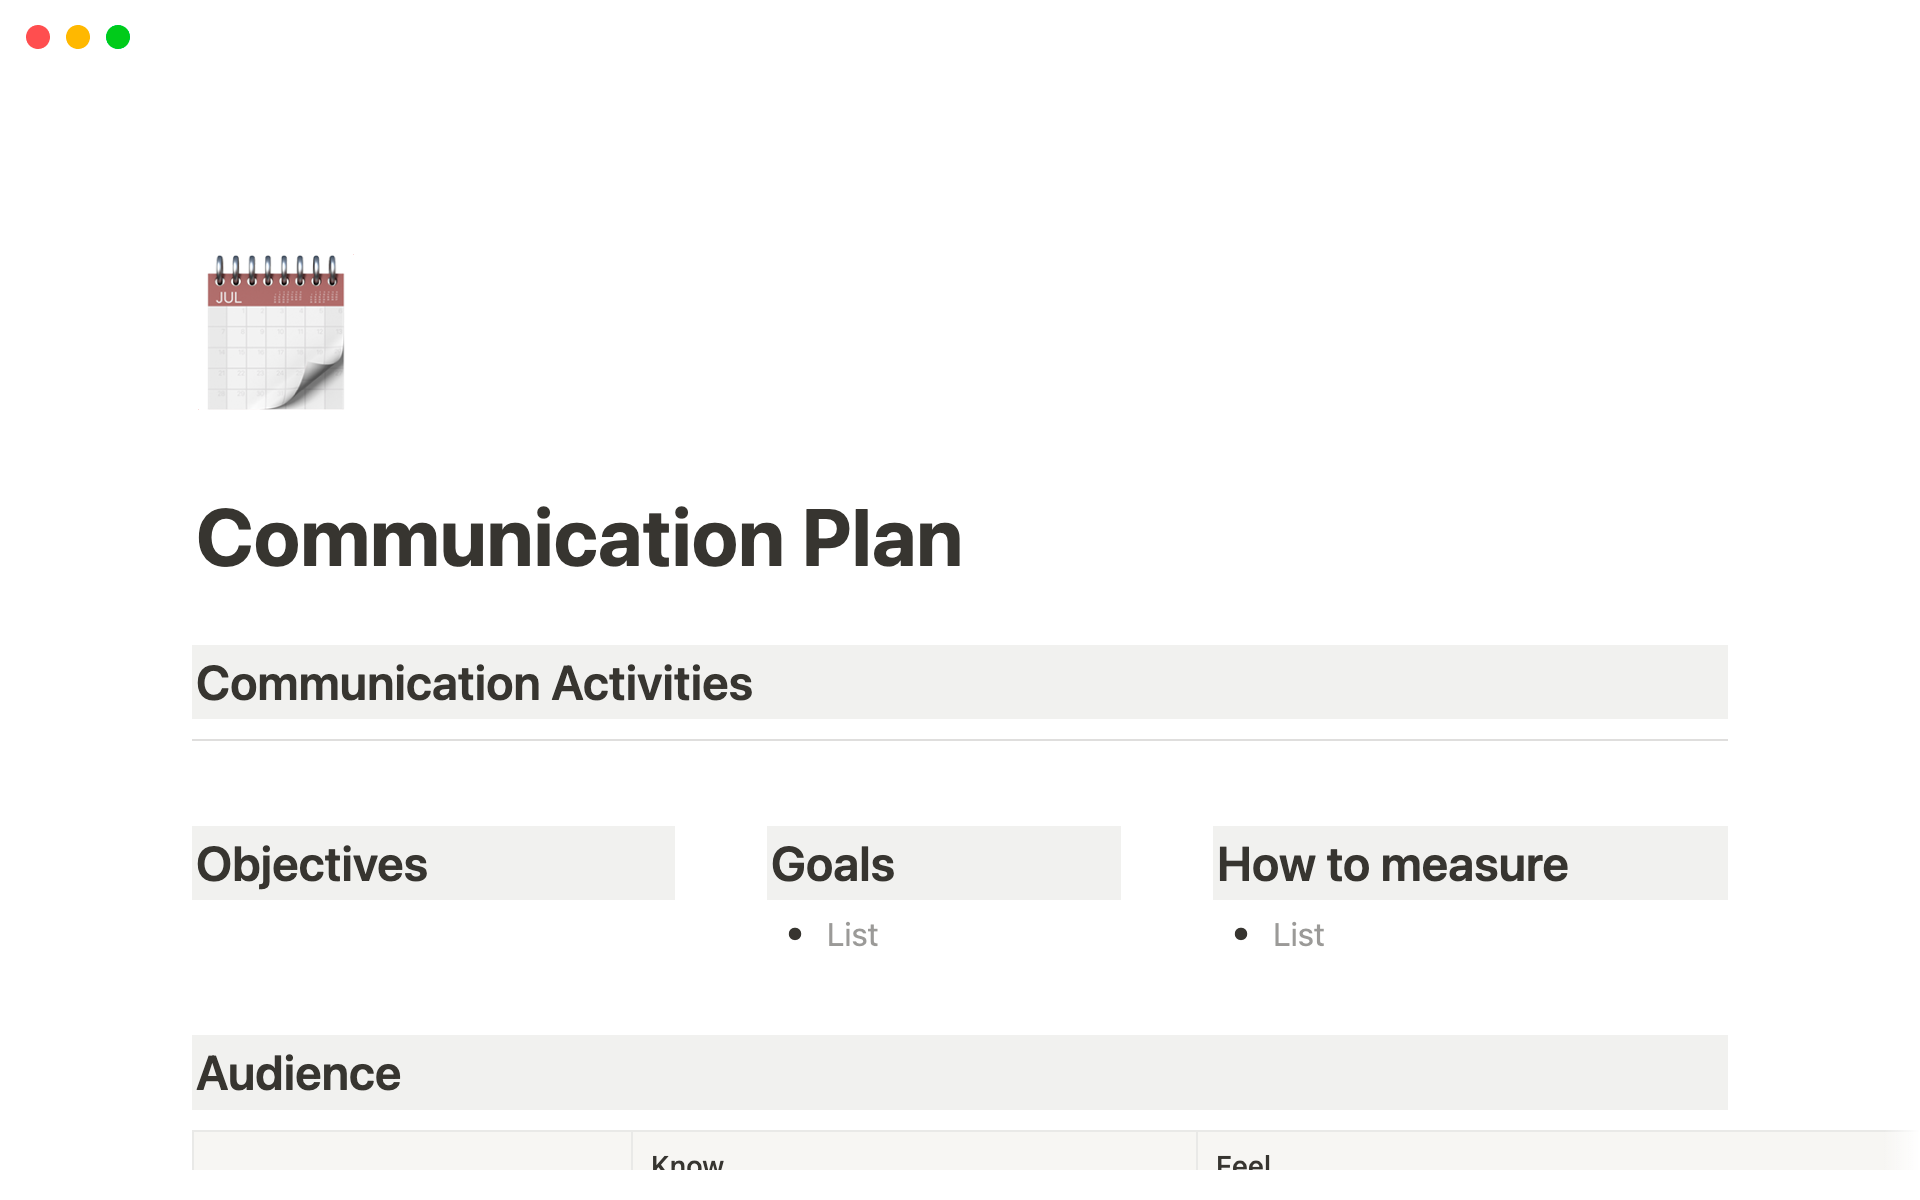 This template helps you to define your communication strategy and communication activities in an efficient and easy-to-read format.